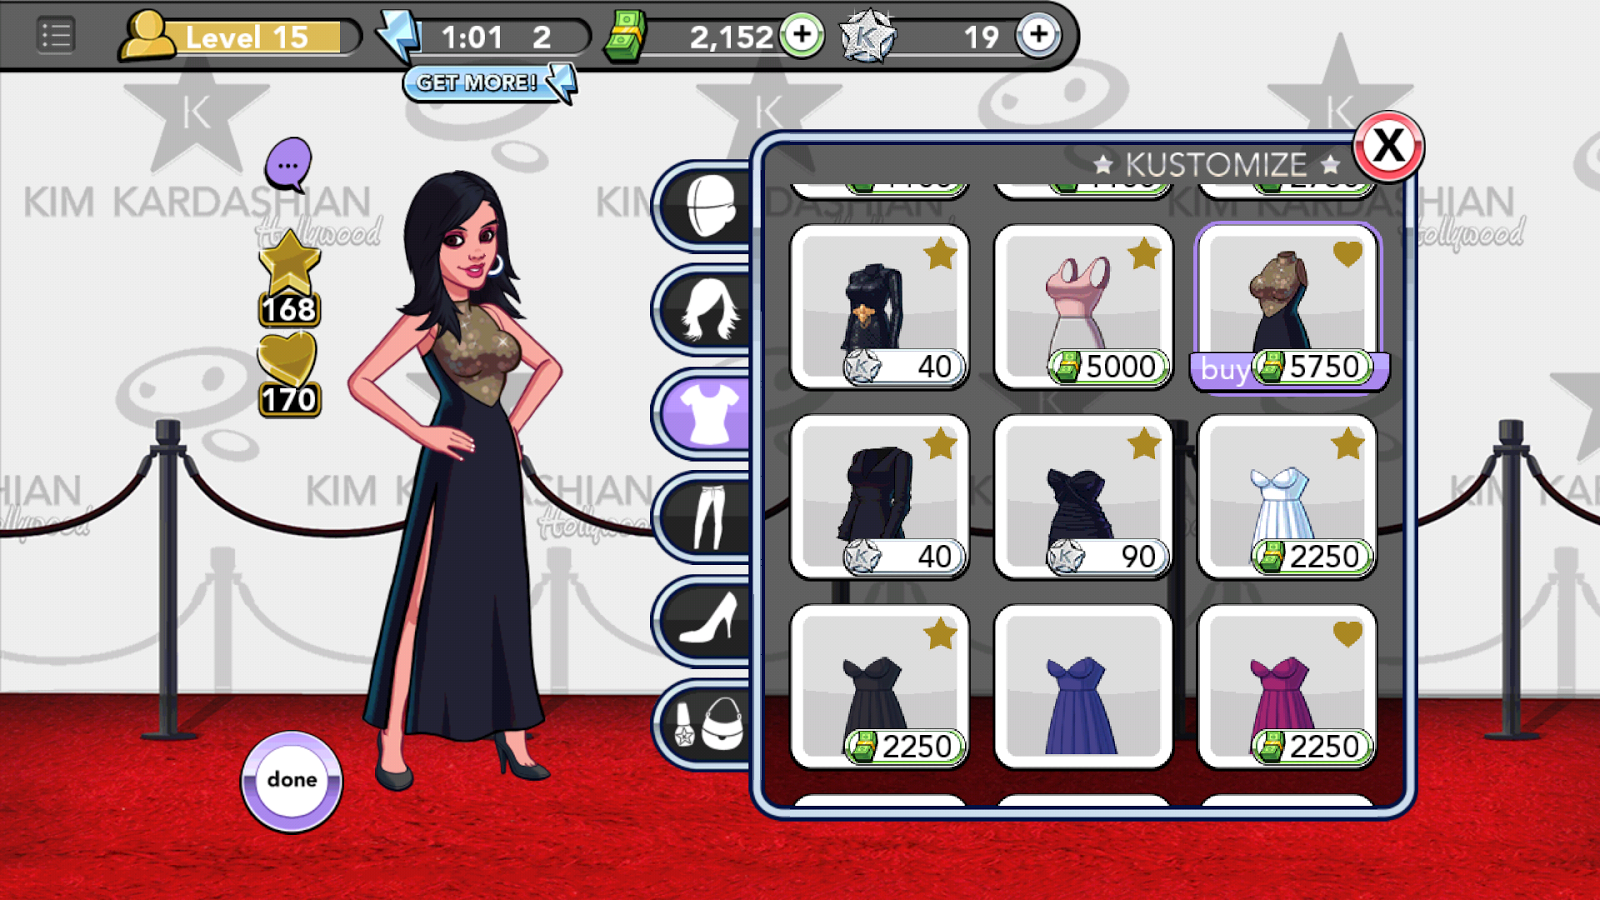 Kim Kardashian: Hollywood game - Kustomize screen for buying and changing clothes